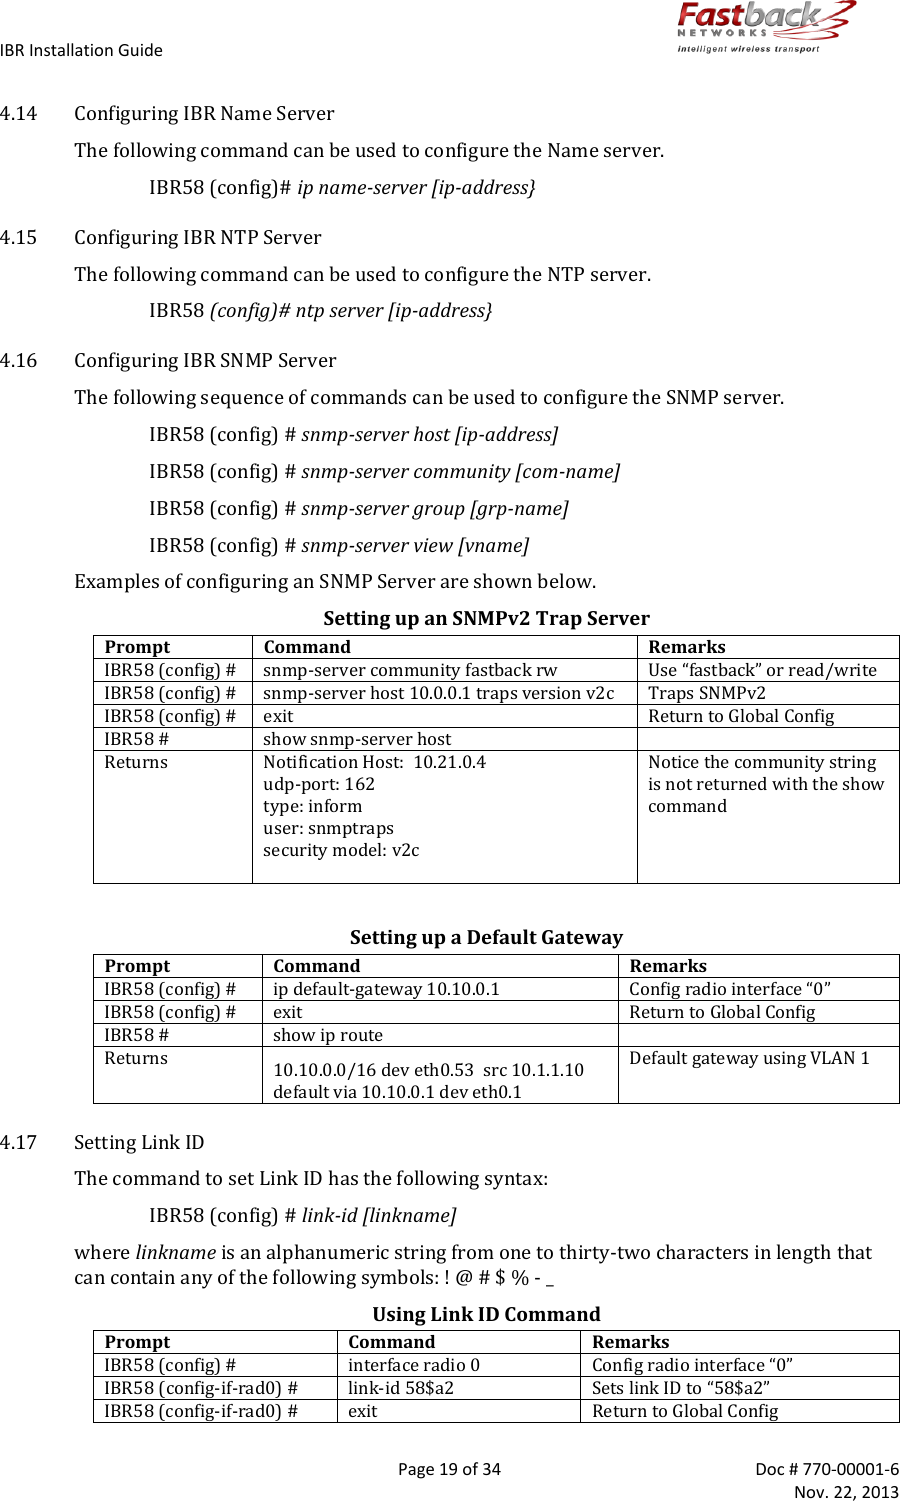 IBR Installation Guide        Page 19 of 34  Doc # 770-00001-6     Nov. 22, 2013   4.14 Configuring IBR Name Server The following command can be used to configure the Name server. IBR58 (config)# ip name-server [ip-address} 4.15 Configuring IBR NTP Server The following command can be used to configure the NTP server. IBR58 (config)# ntp server [ip-address} 4.16 Configuring IBR SNMP Server  The following sequence of commands can be used to configure the SNMP server. IBR58 (config) # snmp-server host [ip-address] IBR58 (config) # snmp-server community [com-name] IBR58 (config) # snmp-server group [grp-name] IBR58 (config) # snmp-server view [vname] Examples of configuring an SNMP Server are shown below. Setting up an SNMPv2 Trap Server Prompt Command Remarks IBR58 (config) # snmp-server community fastback rw Use “fastback” or read/write IBR58 (config) # snmp-server host 10.0.0.1 traps version v2c Traps SNMPv2 IBR58 (config) # exit Return to Global Config IBR58 # show snmp-server host  Returns Notification Host:  10.21.0.4 udp-port: 162  type: inform user: snmptraps security model: v2c  Notice the community string is not returned with the show command  Setting up a Default Gateway Prompt Command Remarks IBR58 (config) # ip default-gateway 10.10.0.1 Config radio interface “0” IBR58 (config) # exit Return to Global Config IBR58 # show ip route  Returns 10.10.0.0/16 dev eth0.53  src 10.1.1.10 default via 10.10.0.1 dev eth0.1 Default gateway using VLAN 1 4.17 Setting Link ID The command to set Link ID has the following syntax: IBR58 (config) # link-id [linkname] where linkname is an alphanumeric string from one to thirty-two characters in length that can contain any of the following symbols: ! @ # $ % - _ Using Link ID Command Prompt Command Remarks IBR58 (config) # interface radio 0 Config radio interface “0” IBR58 (config-if-rad0) # link-id 58$a2 Sets link ID to “58$a2” IBR58 (config-if-rad0) # exit Return to Global Config 